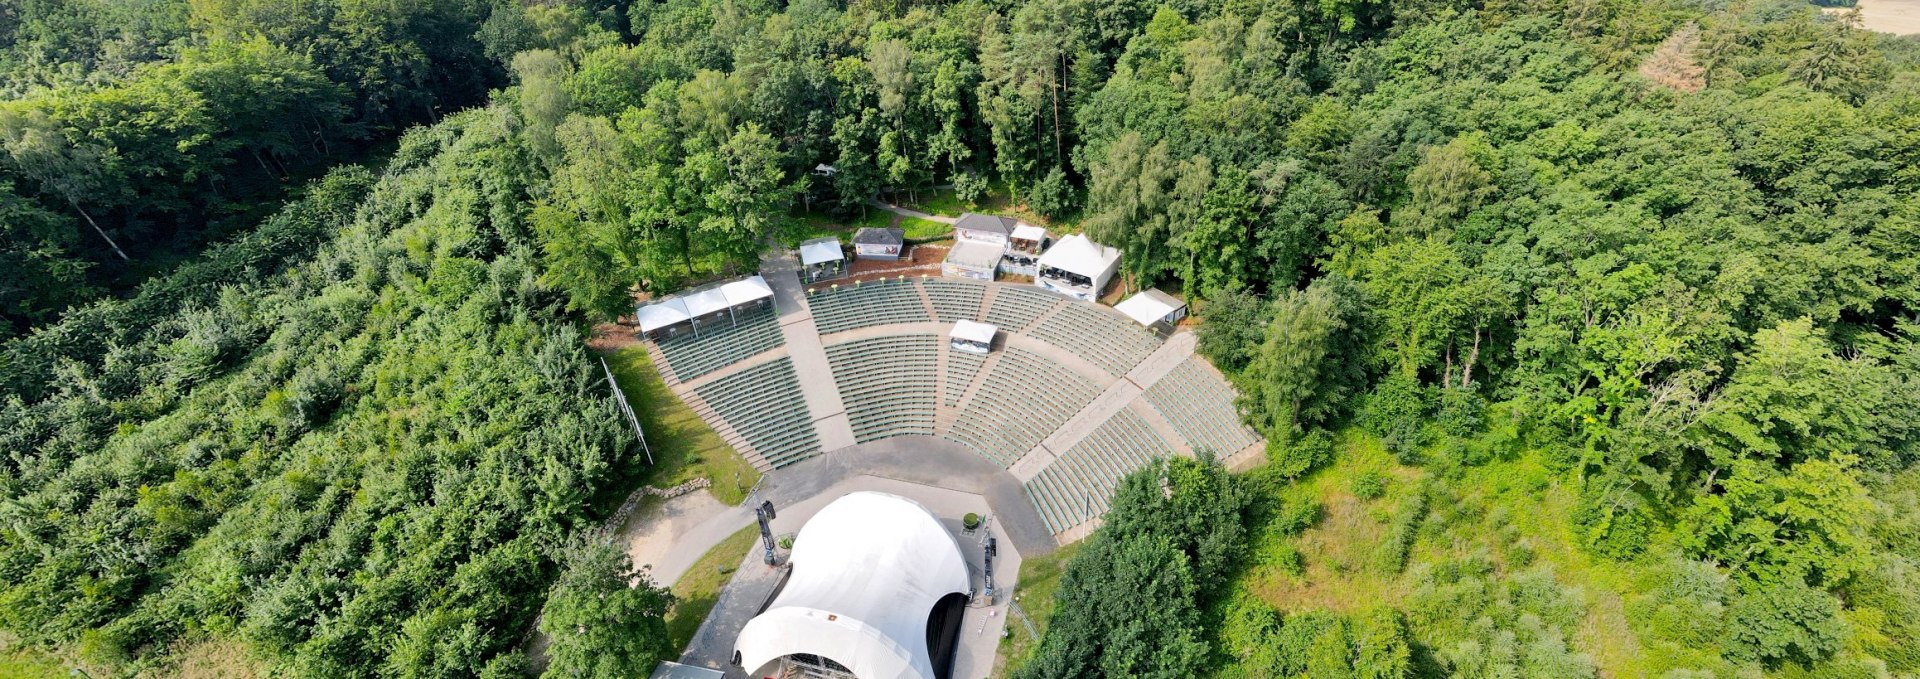 Event location with capacity for over 5,000 visitors: the Waldbühne Rügen., © Waldbühne Rügen GmbH& Co.KG